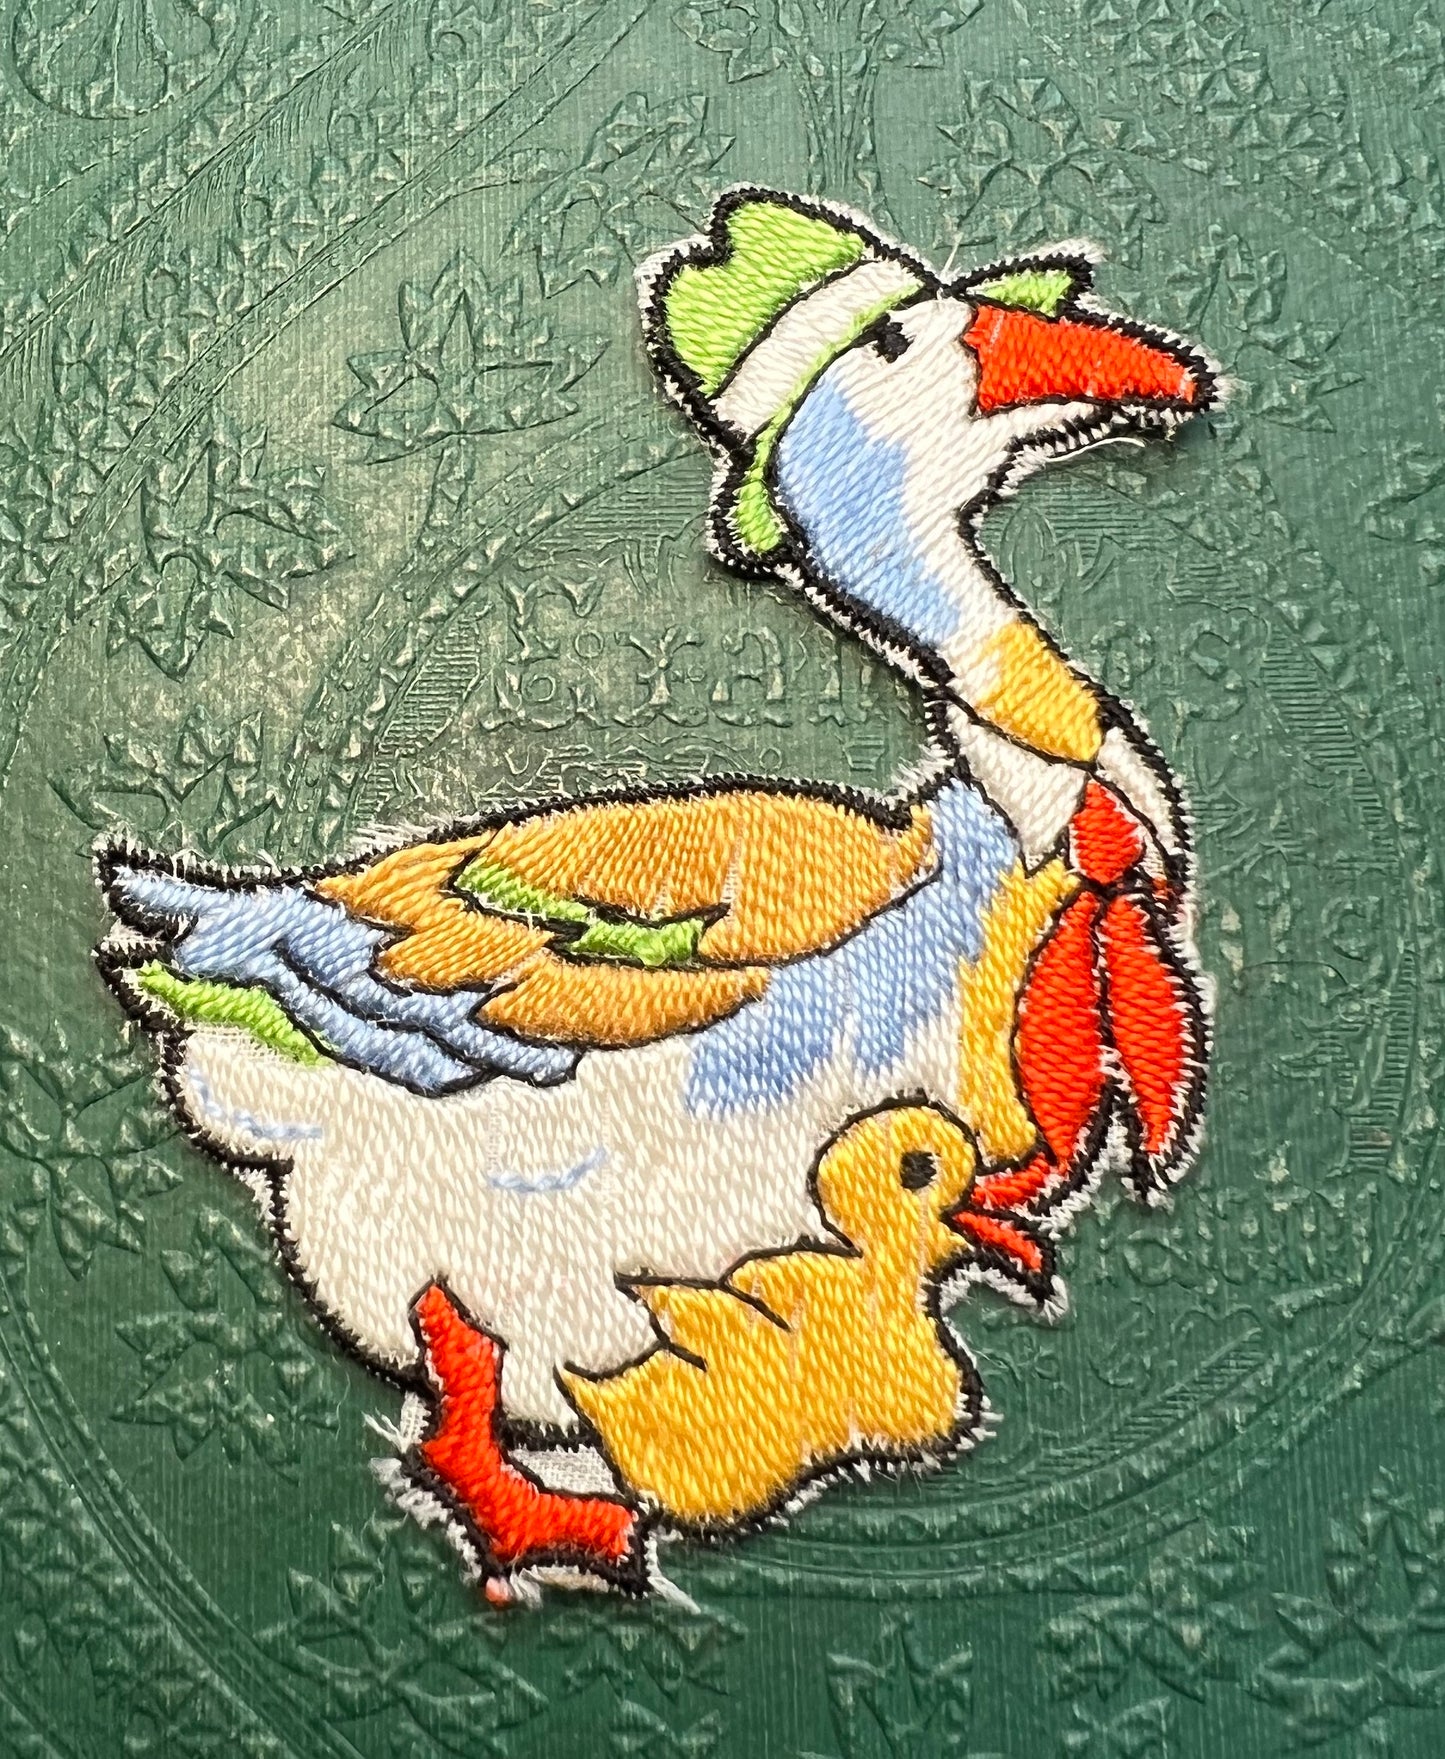 1940s Applique - Goose in a Hat and Tie, with Duckling !